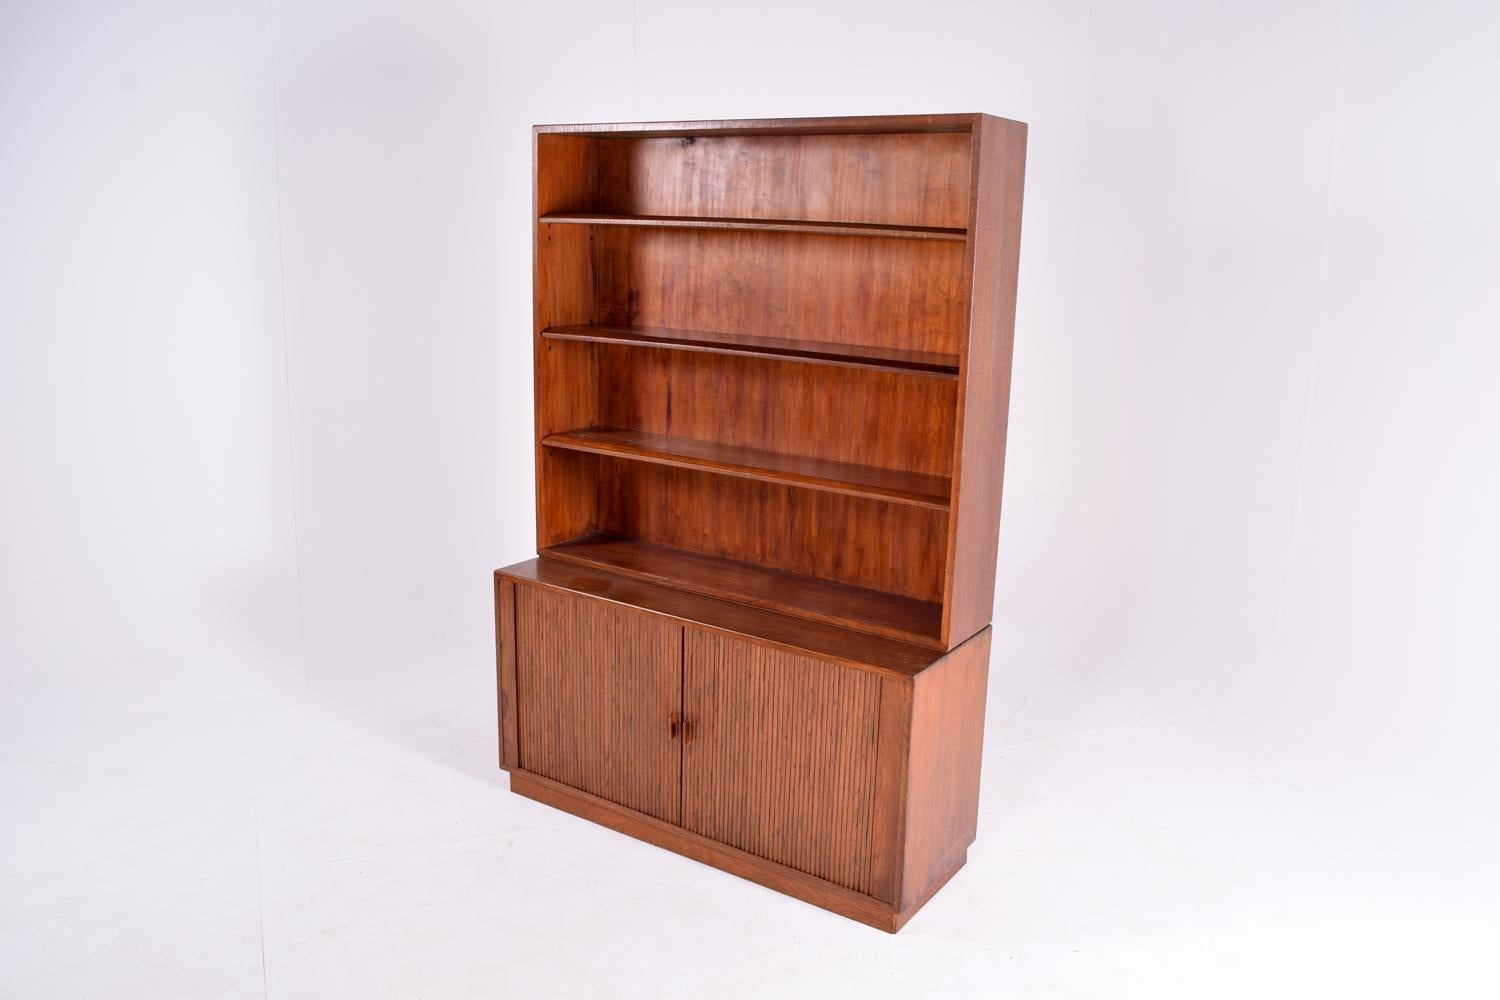 Midcentury Danish oak bookcase, with an amazing woodwork on the bottom part, with two elegant and sliding doors. Adjustable height shelves with on top part, circa 1960.